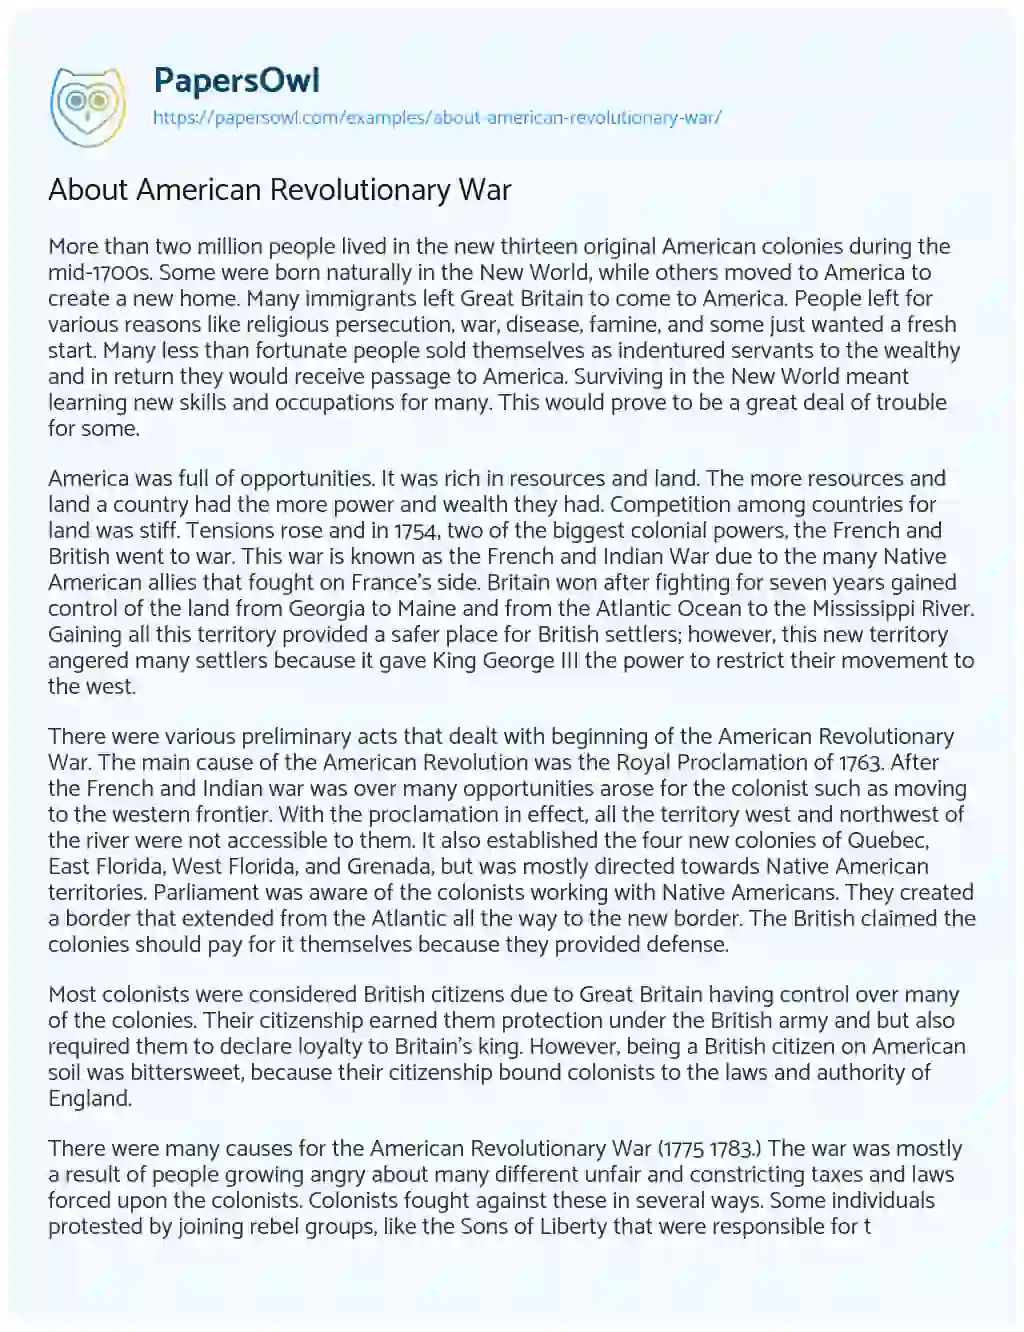 Essay on About American Revolutionary War